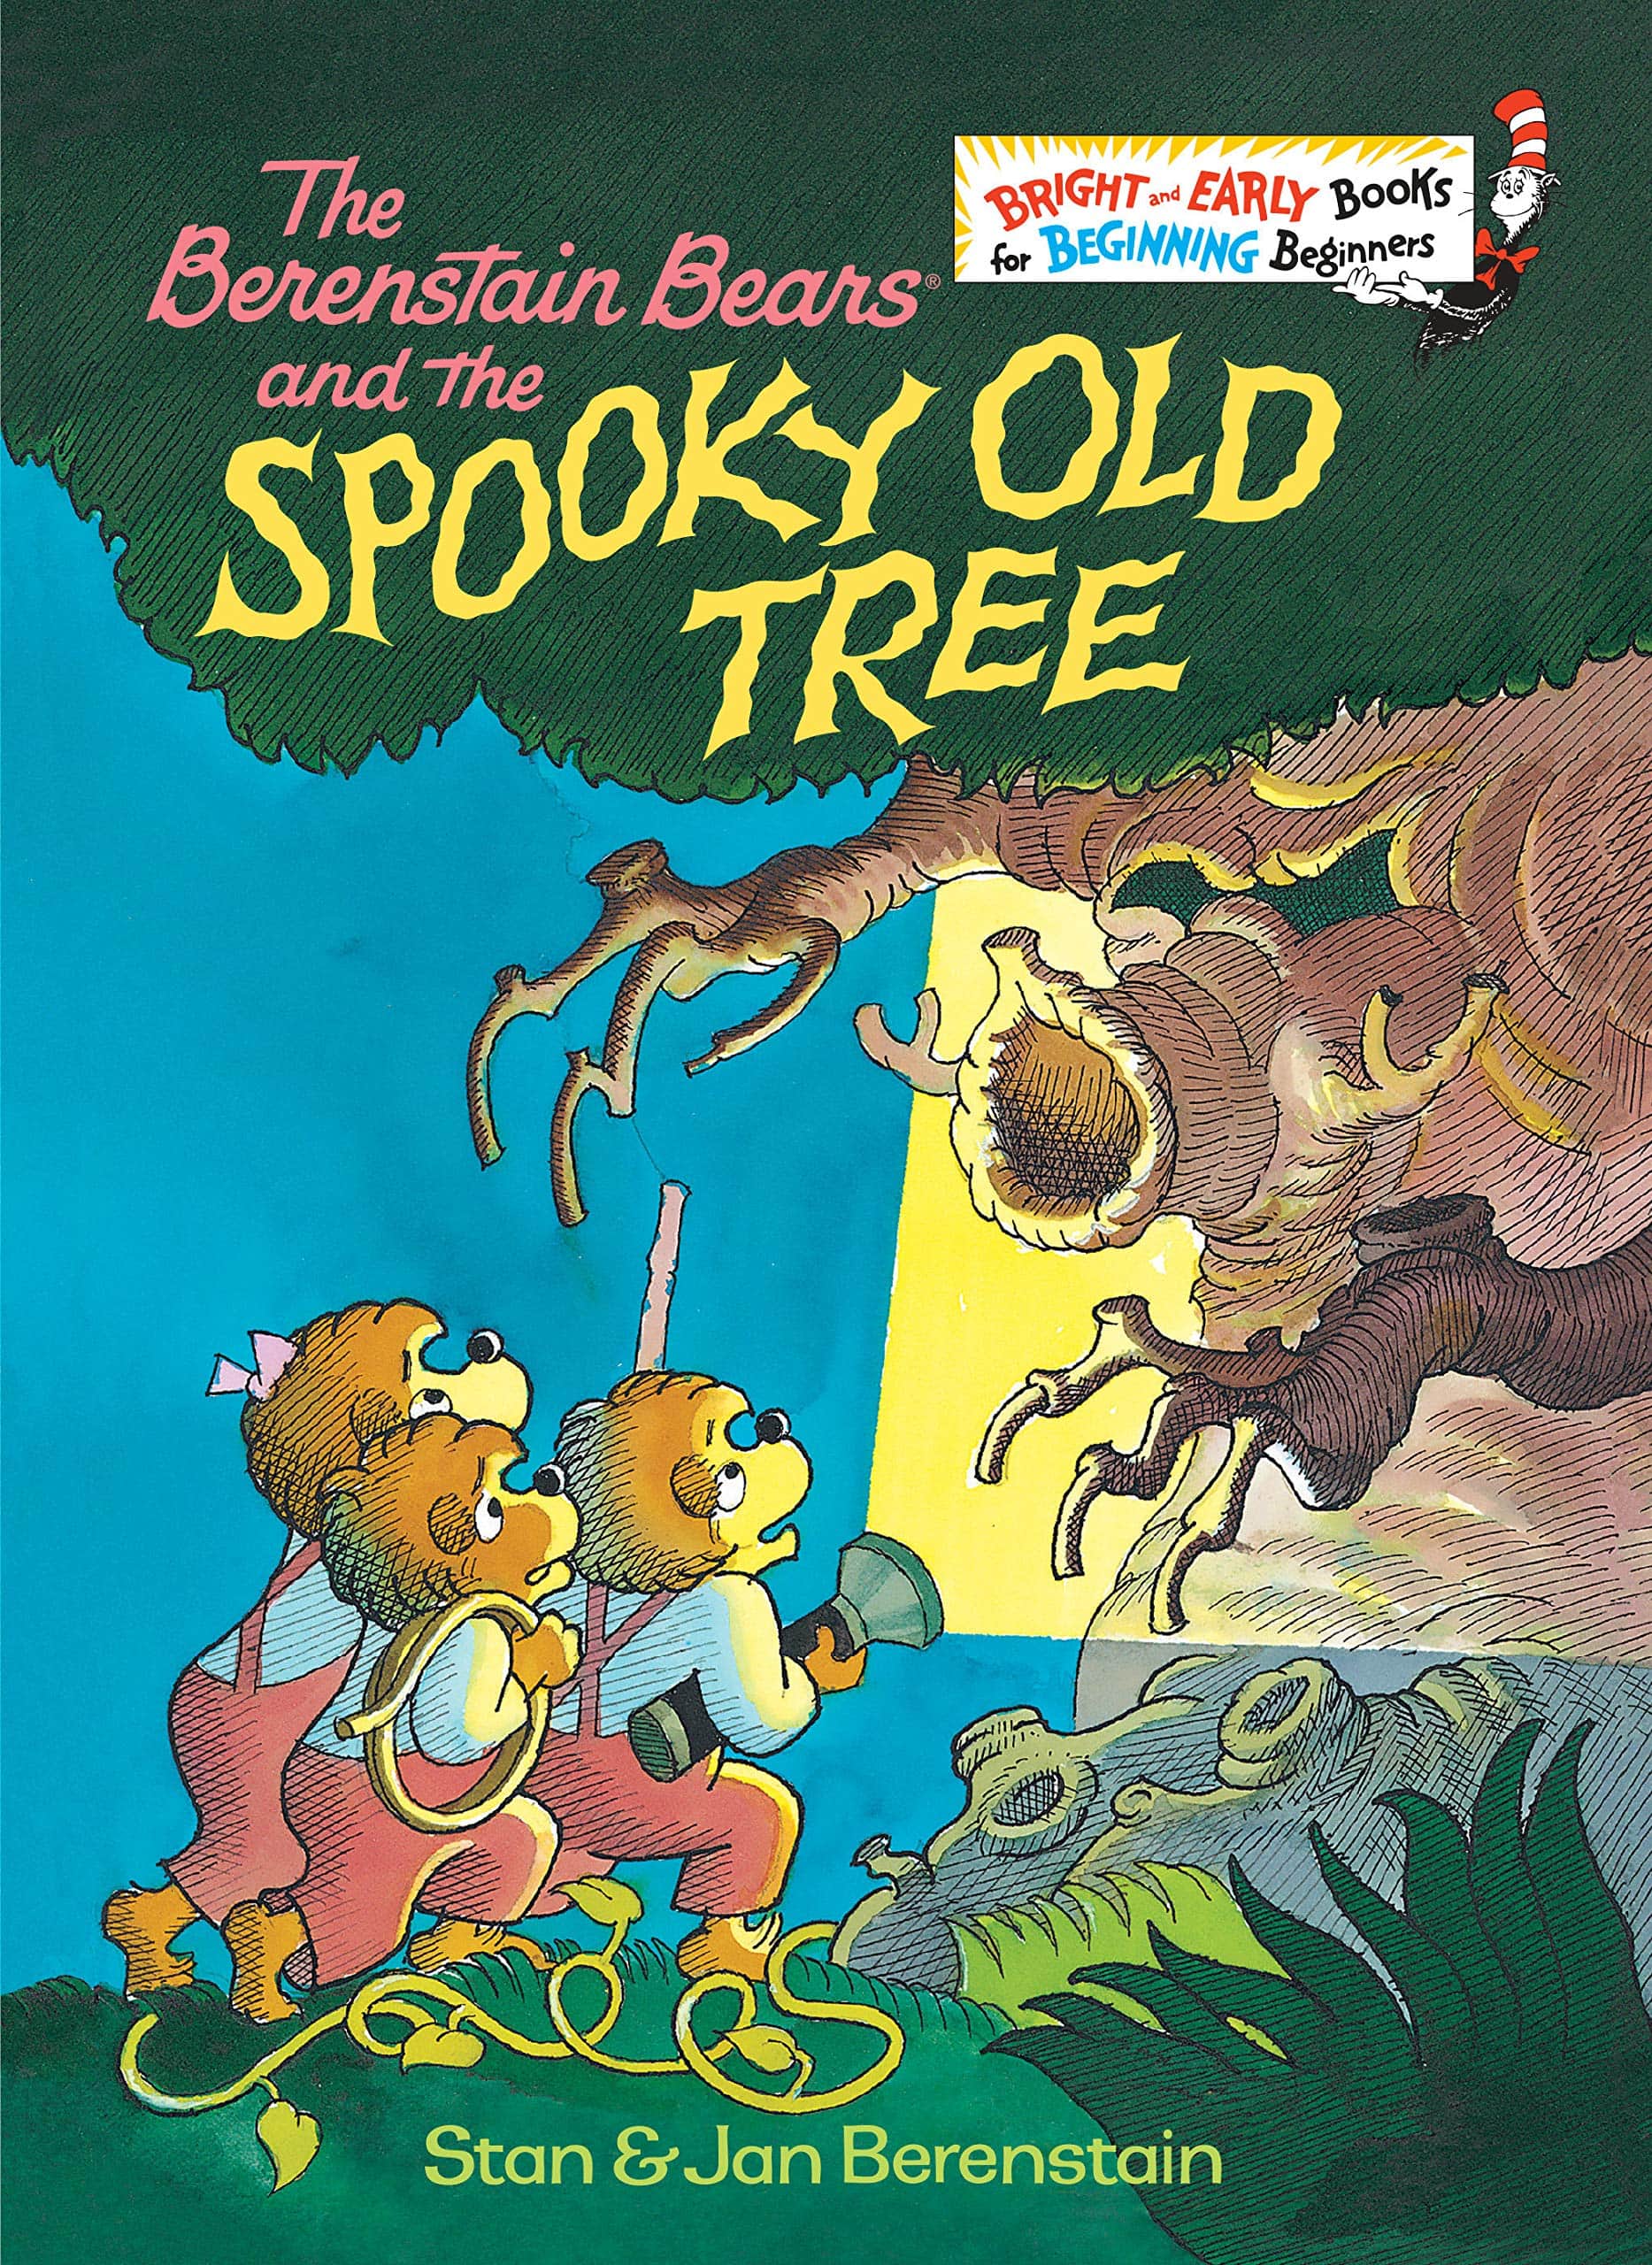 "The Berenstain Bears and the Spooky Old Tree" by Stan Berenstain